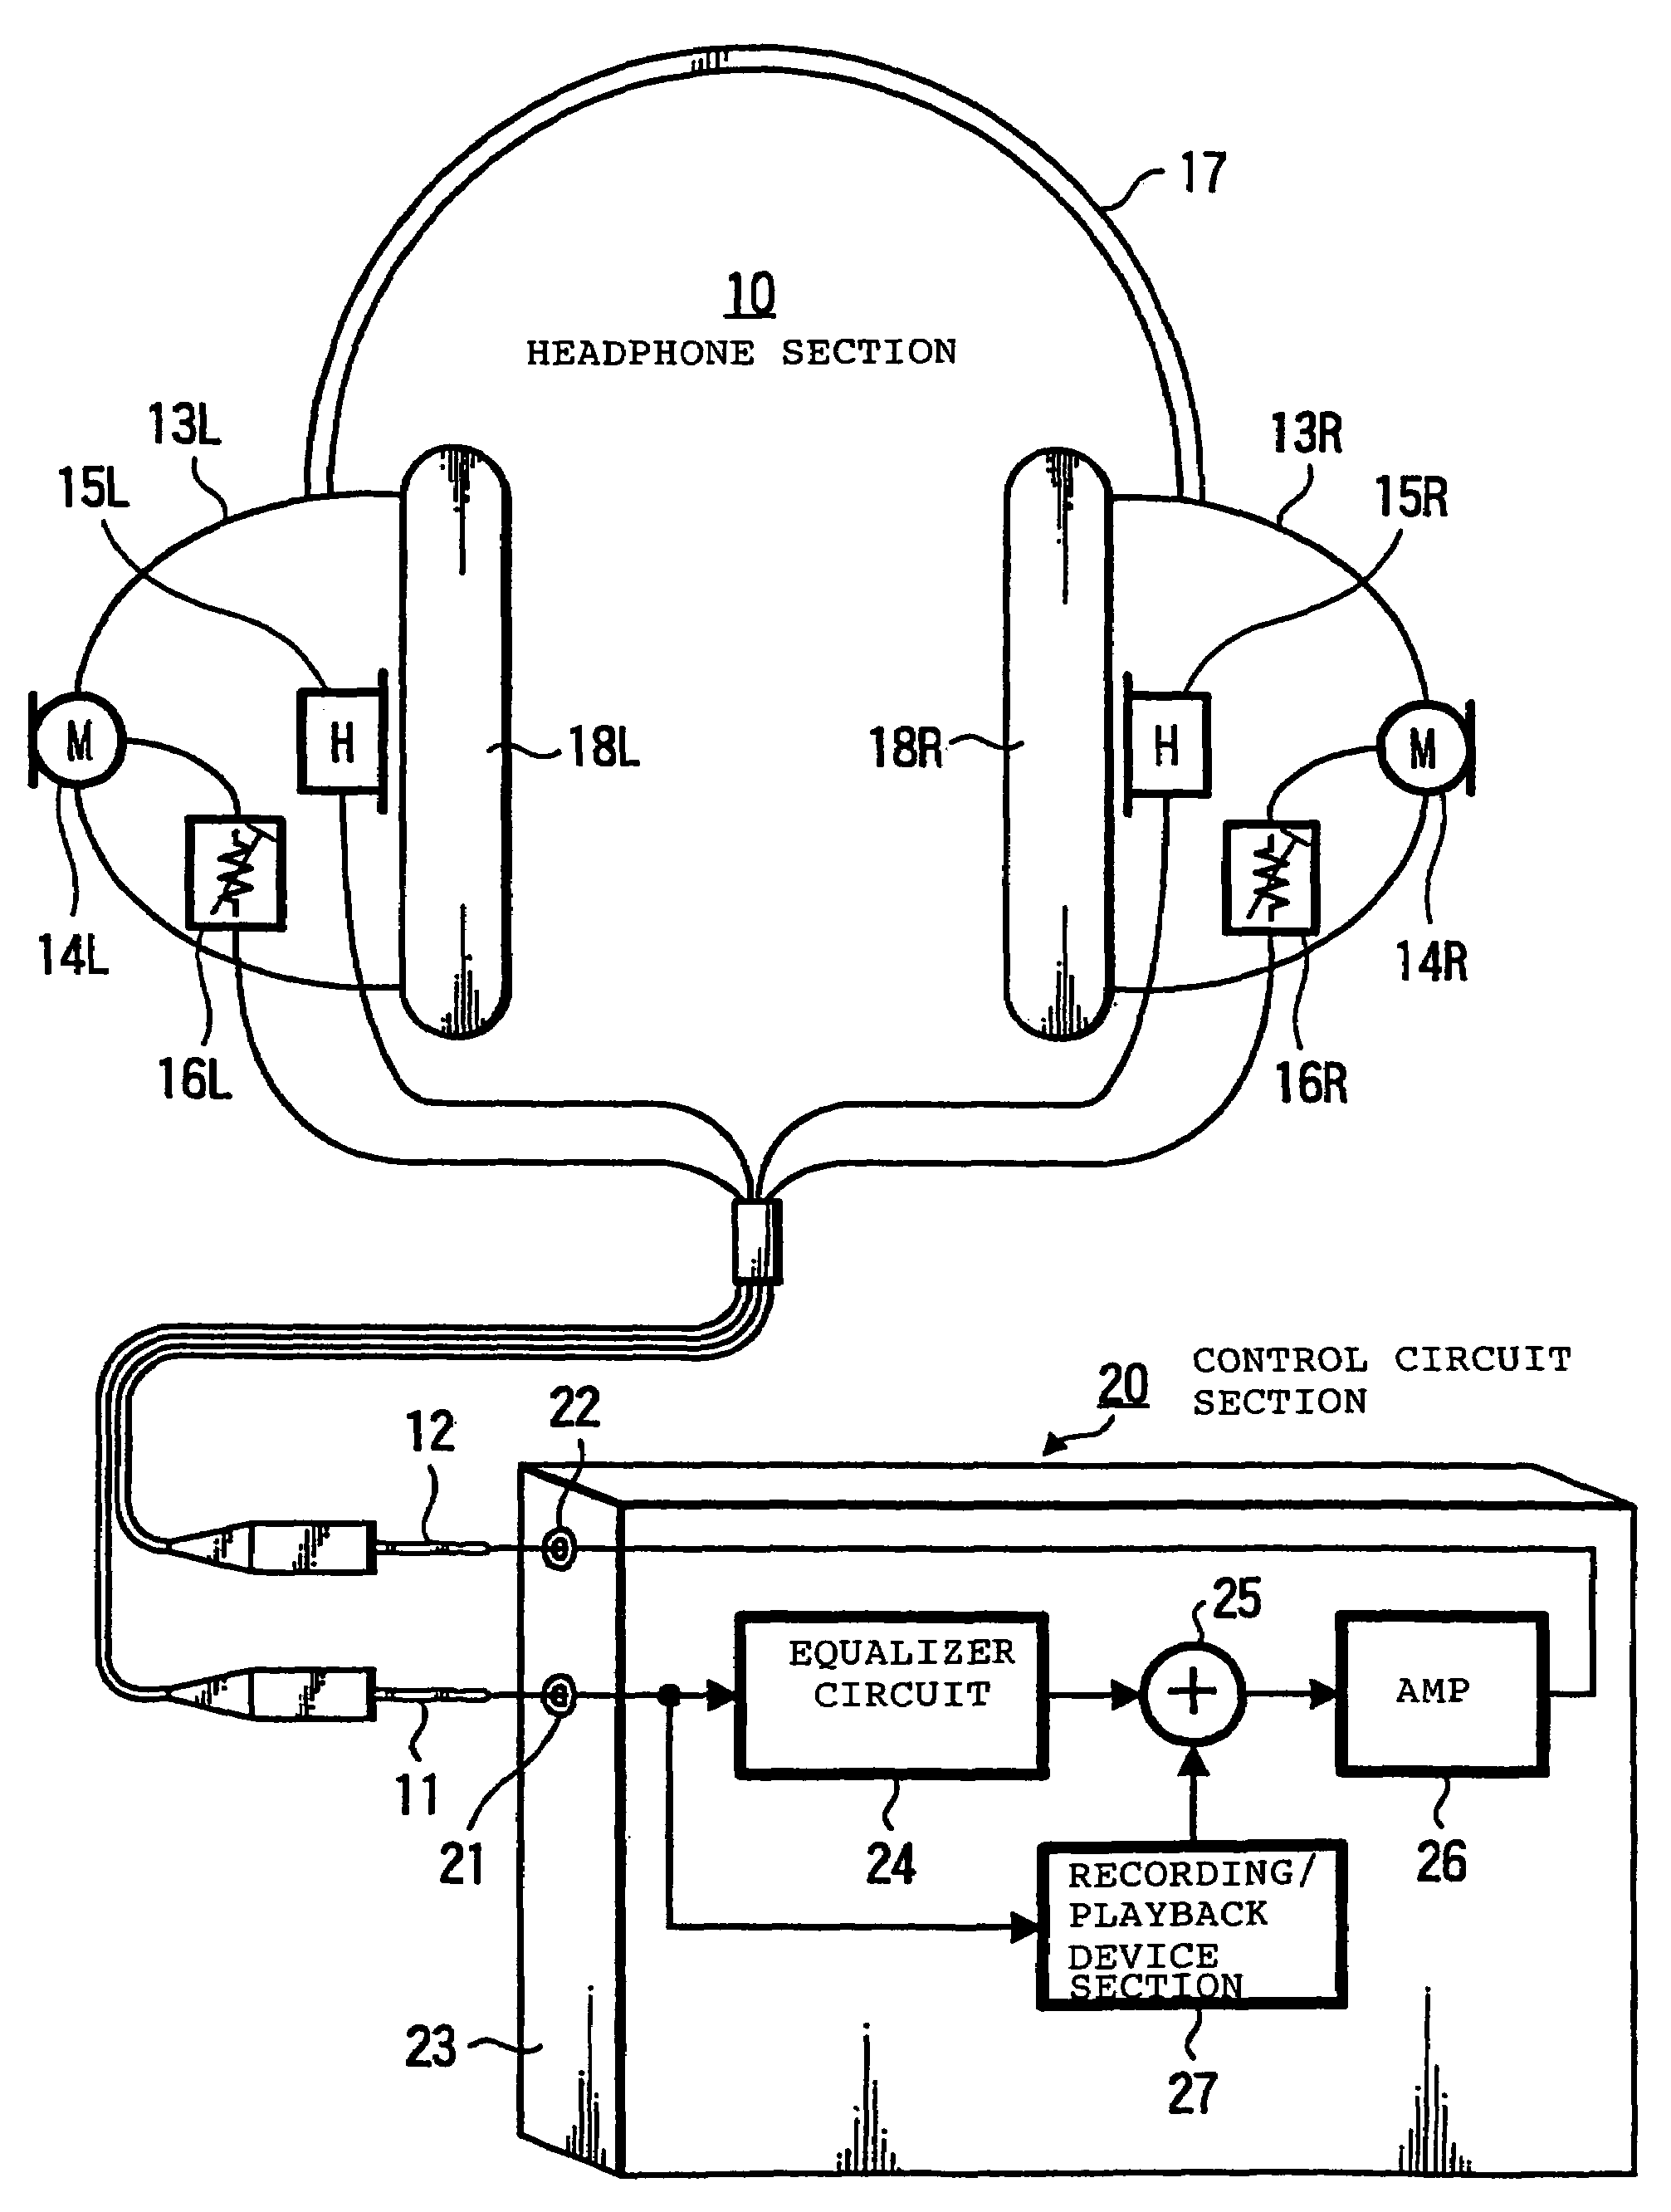 Acoustic apparatus and headphone